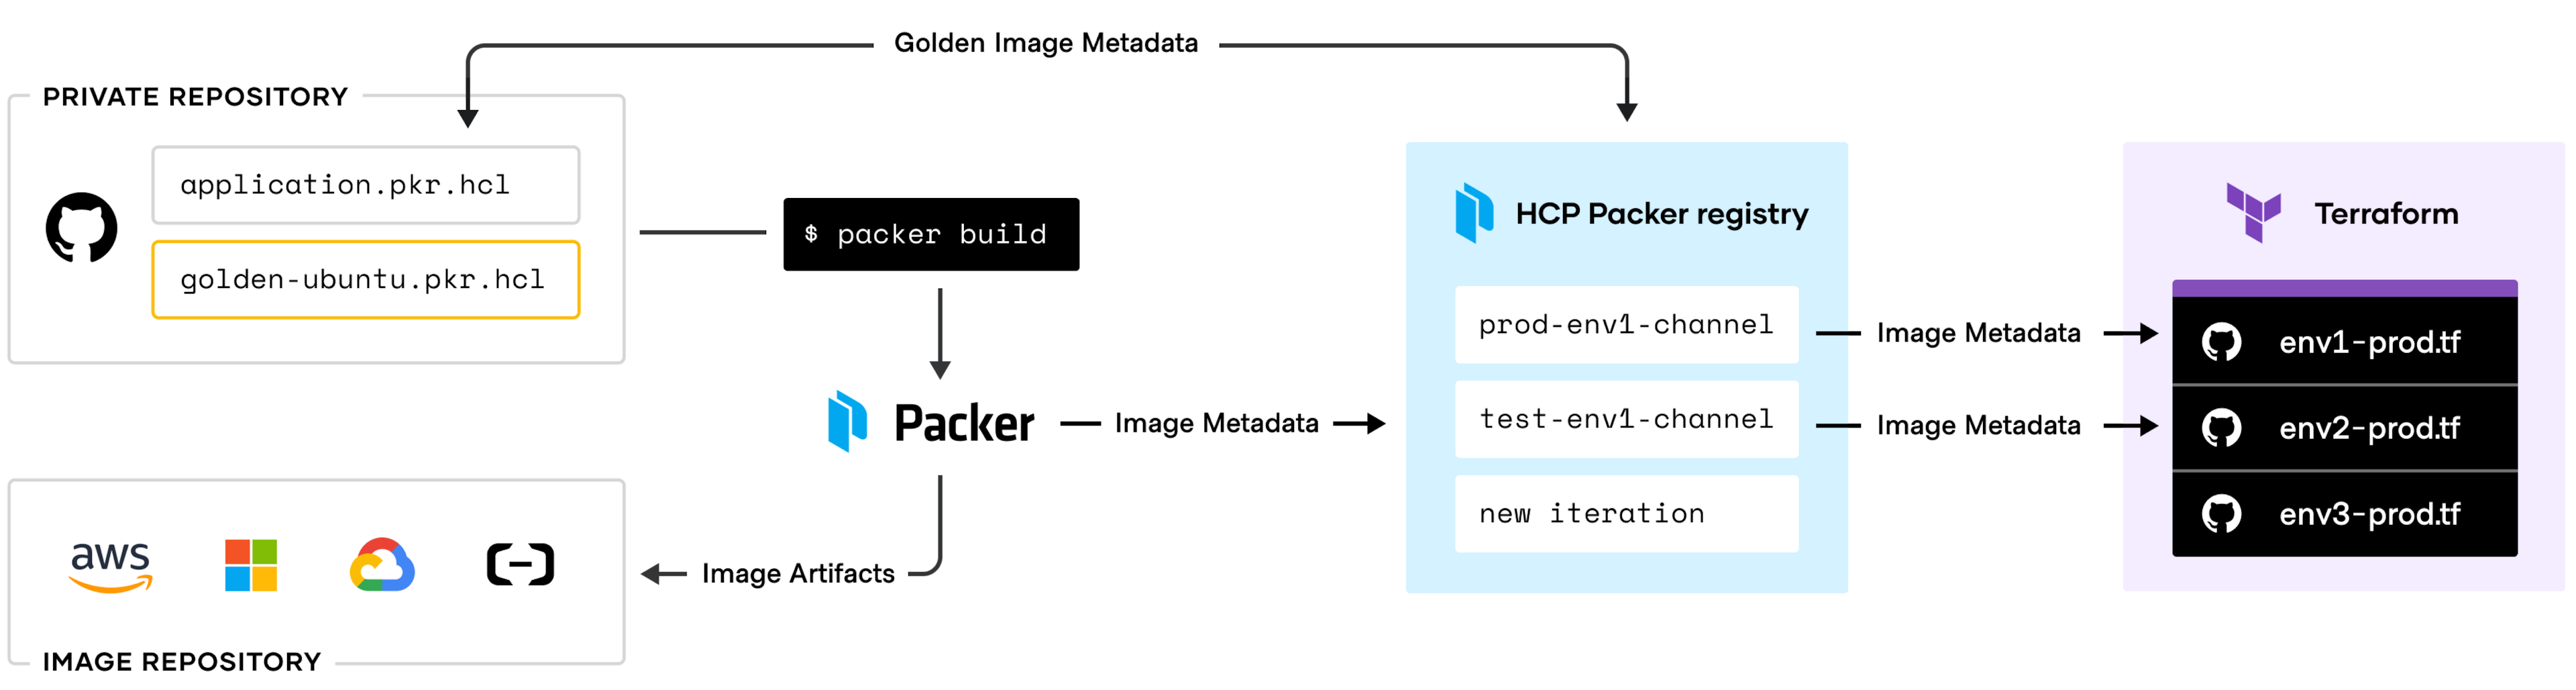 Overview of HCP Packer image metadata publishing and consumption